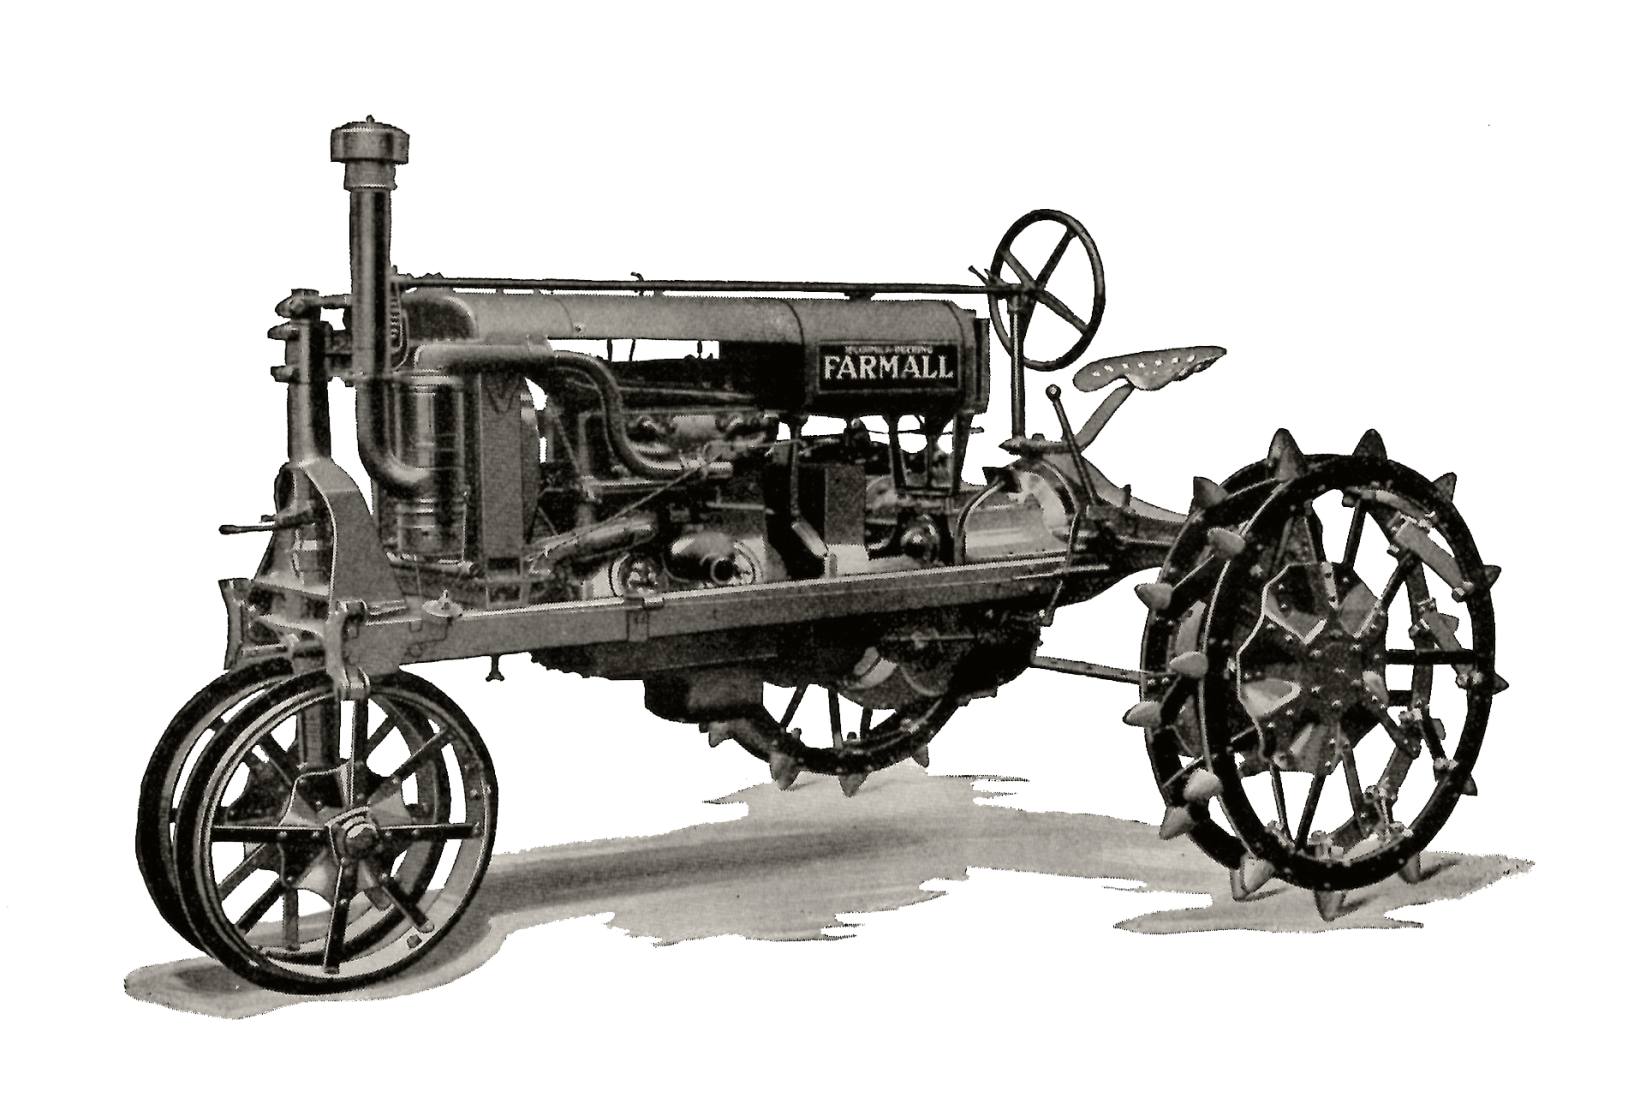 Black and white image of a 1923 Farmall tractor